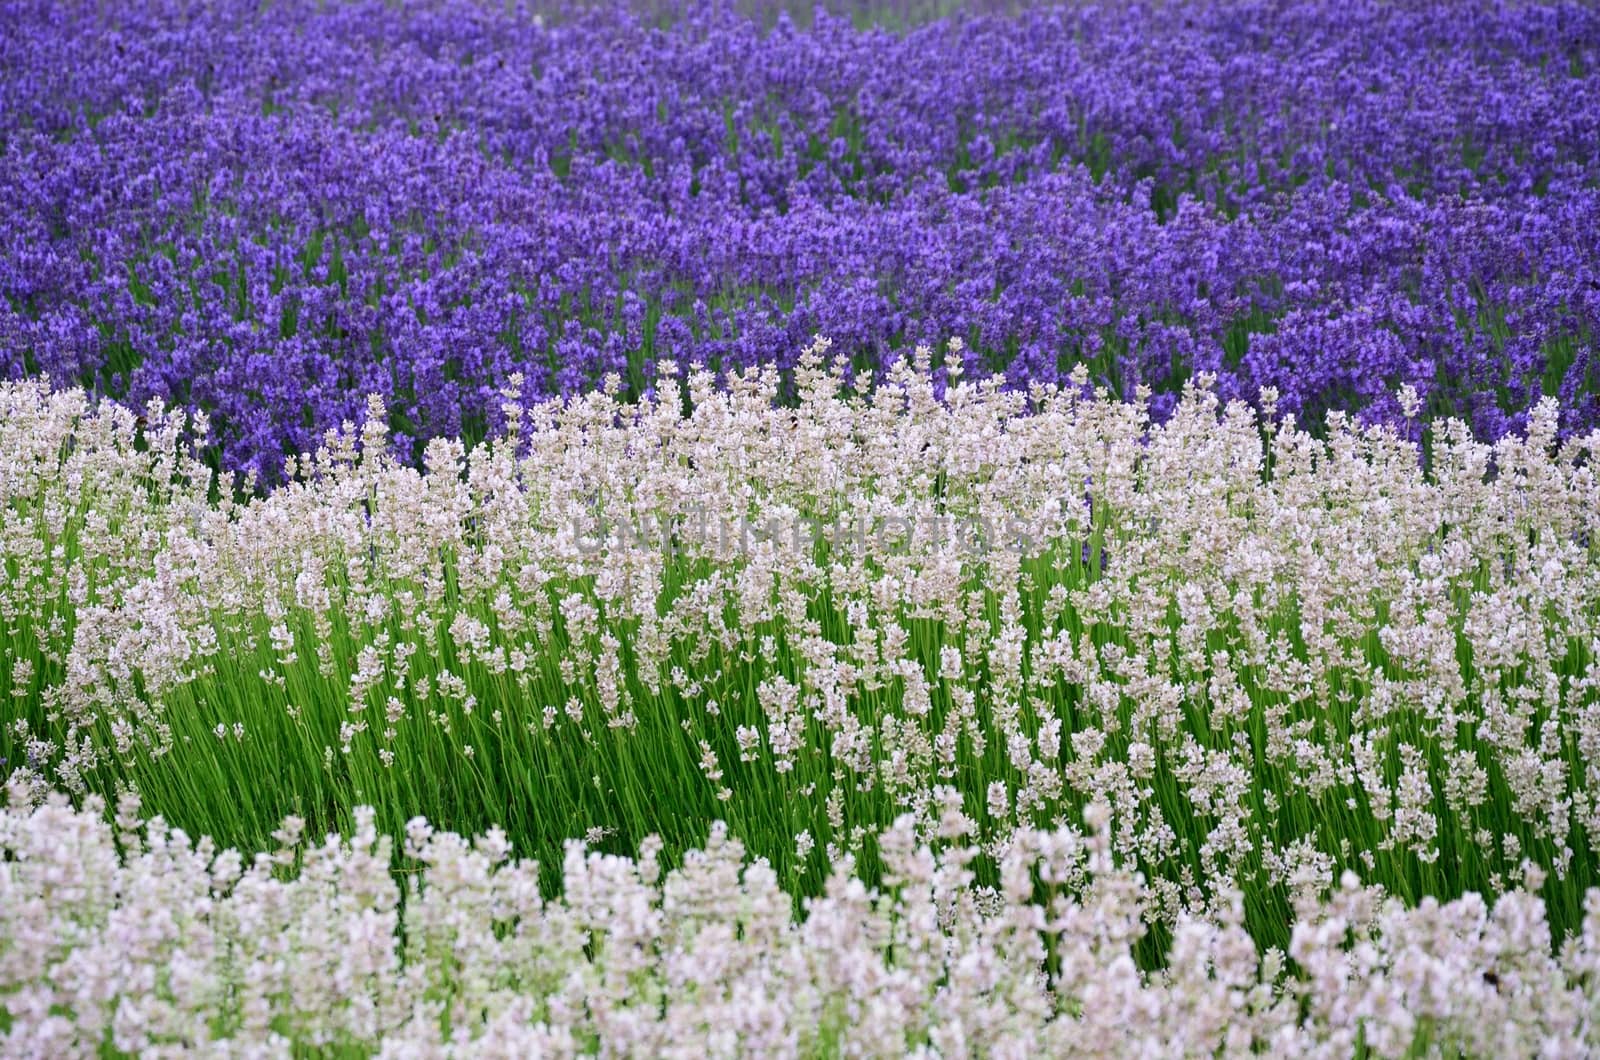 Purple and white lavender by pauws99